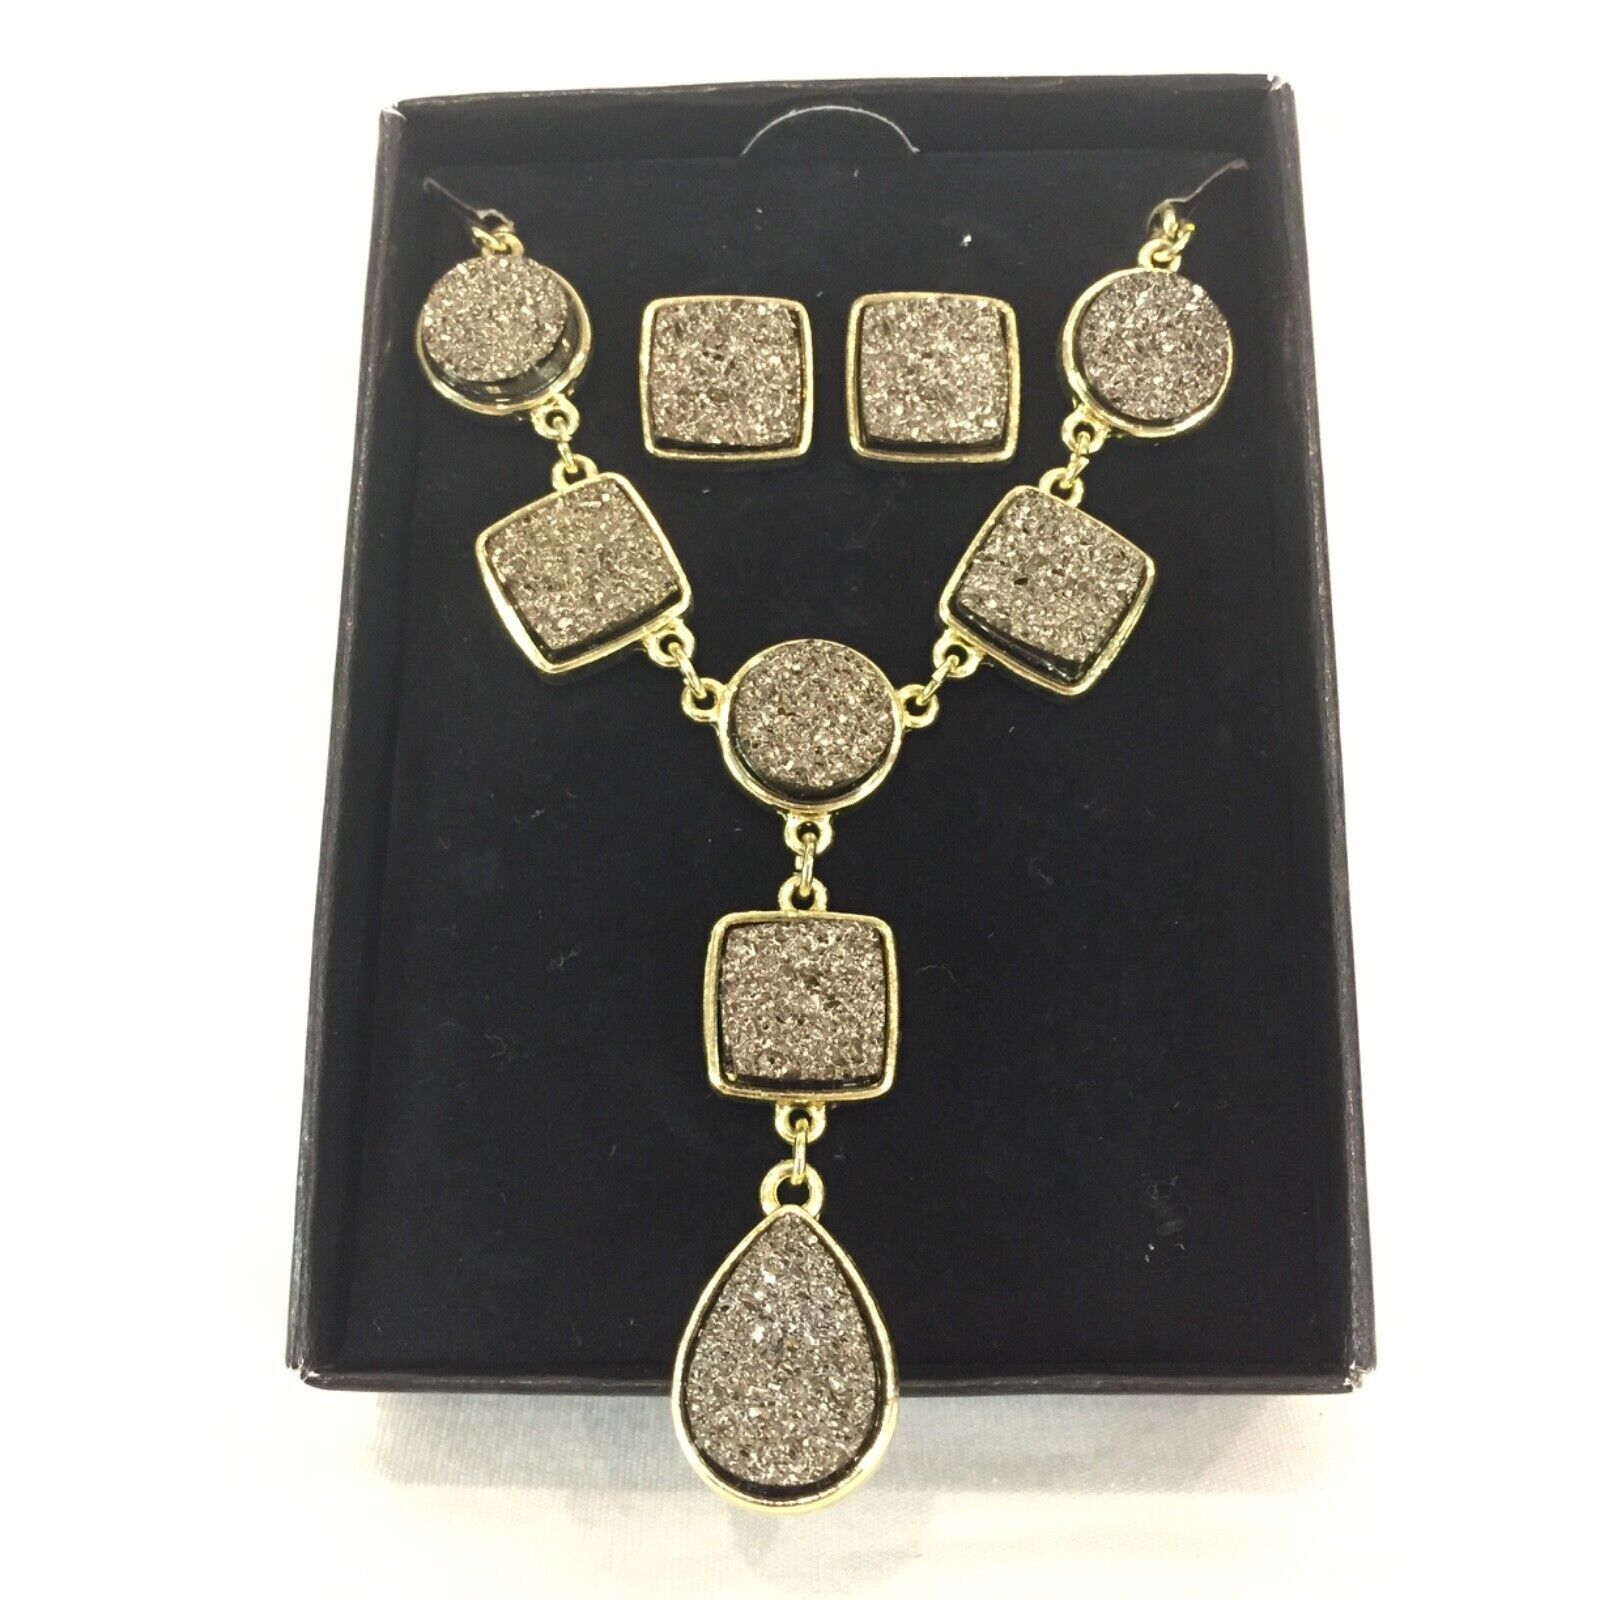 New In Original Box Drusy Style Necklace & Earring Gift Set Avon 2012 - $11.86